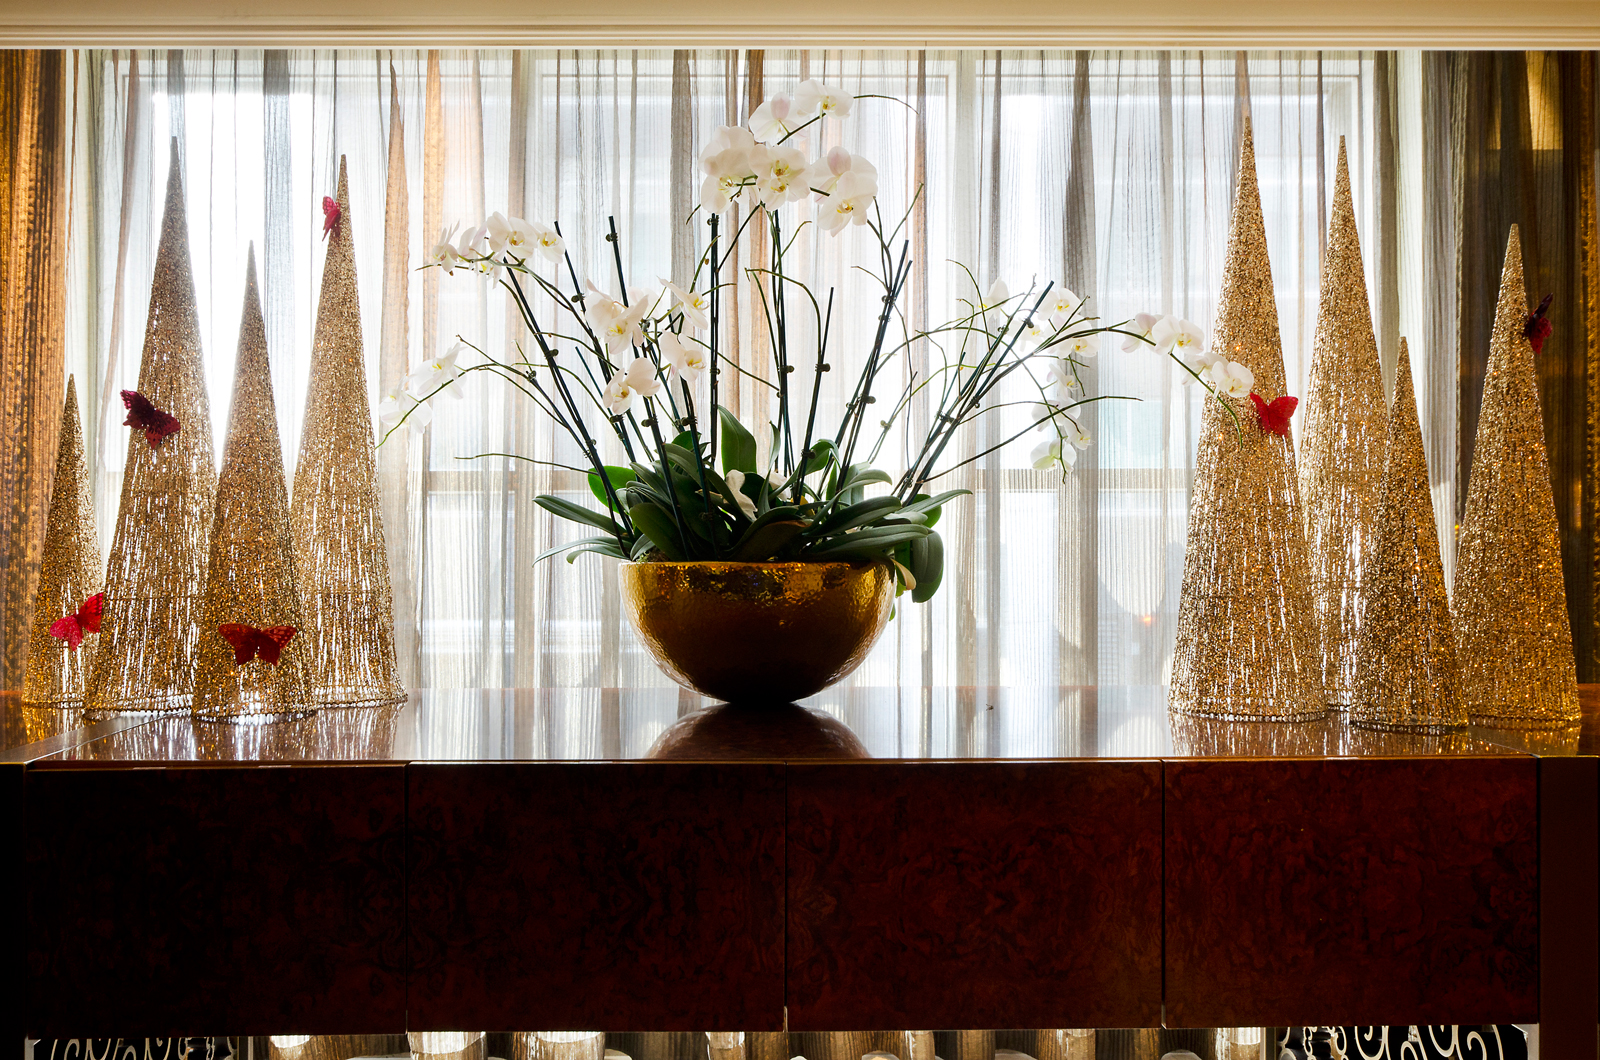 Langham Hotel, Melbourne, Christmas decor by VISUAL STATEMENTS